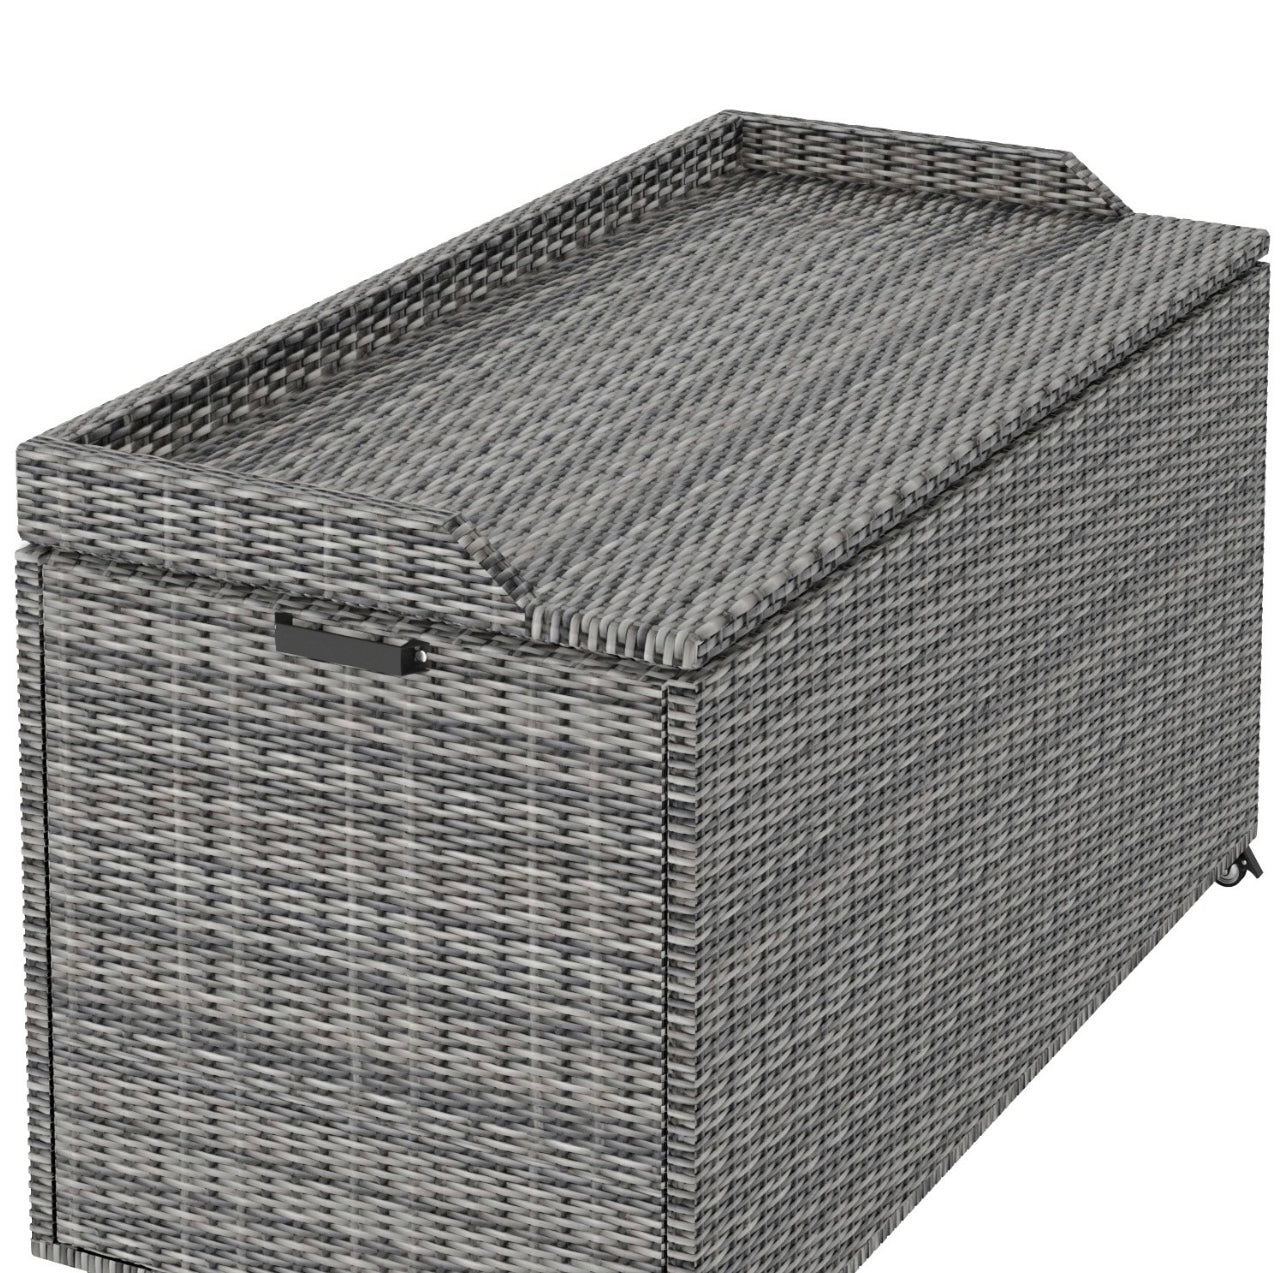 Rattan Cushion Box with Gas Lift Outdoor Patio